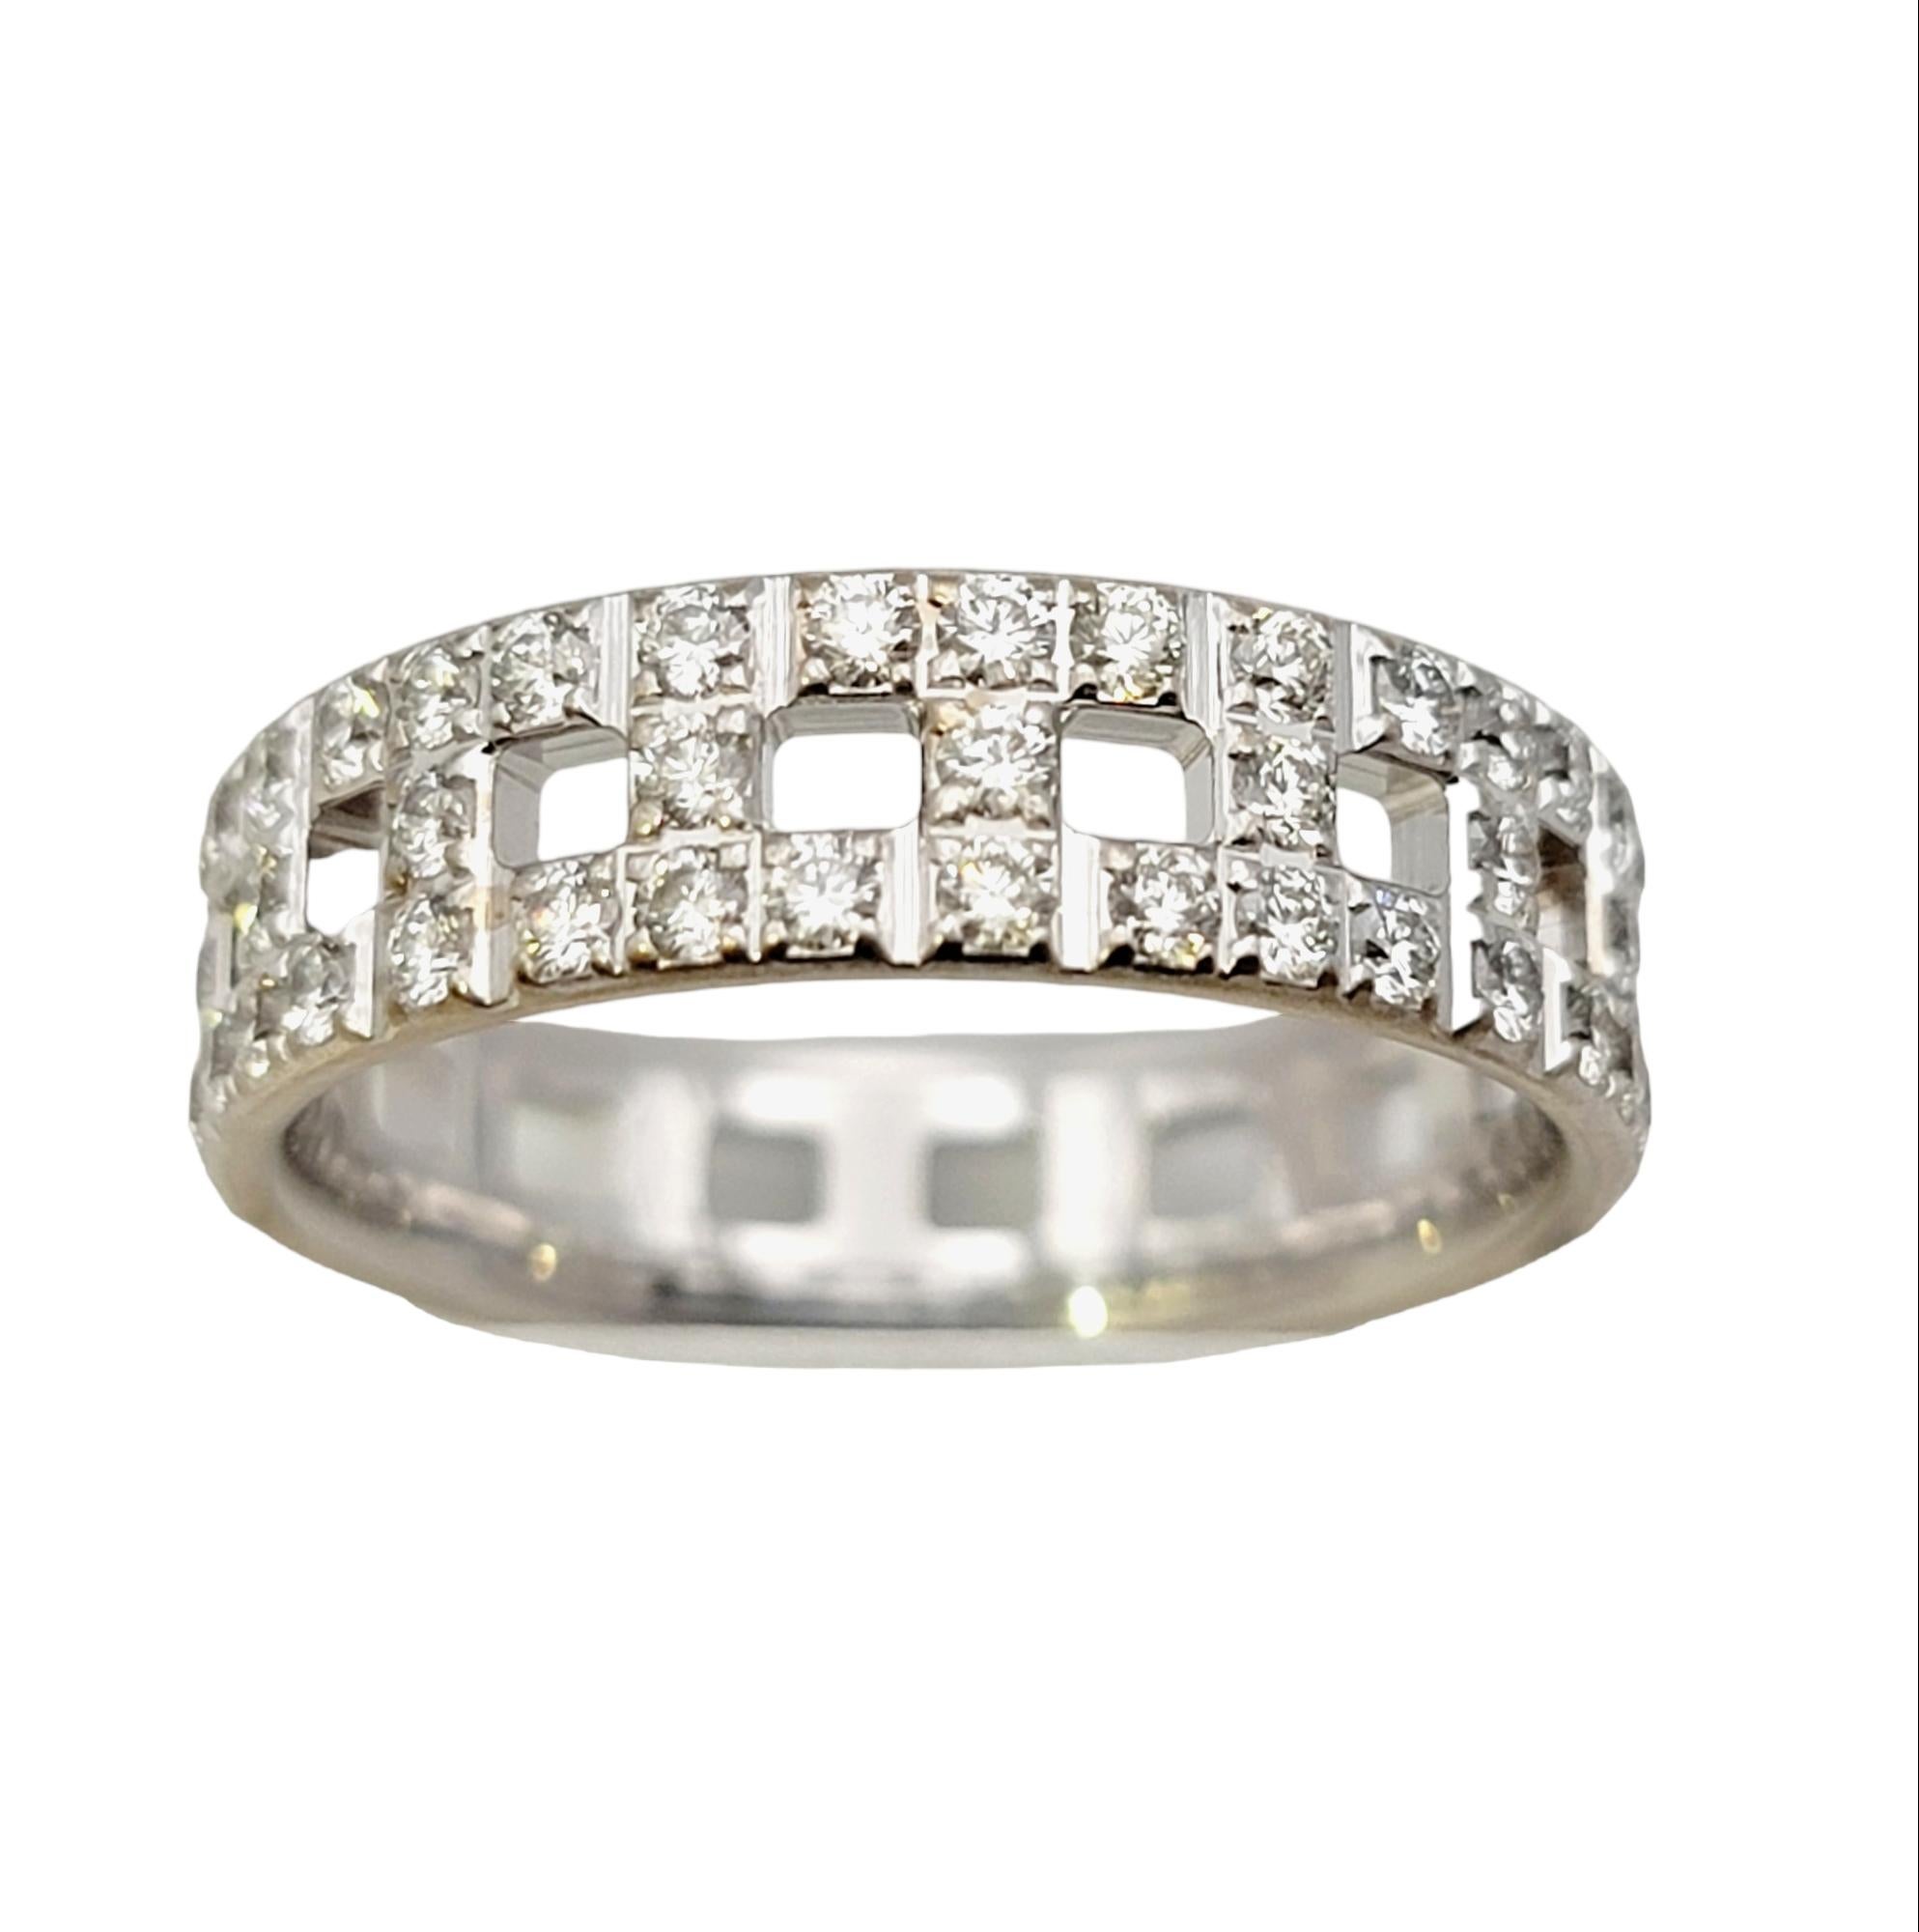 Ring size: 7.5

Dazzling Tiffany T diamond band ring is absolutely striking on the finger.  Founded in 1837 in New York City, Tiffany & Co. is one of the world's most storied luxury design houses recognized globally for its innovative jewelry